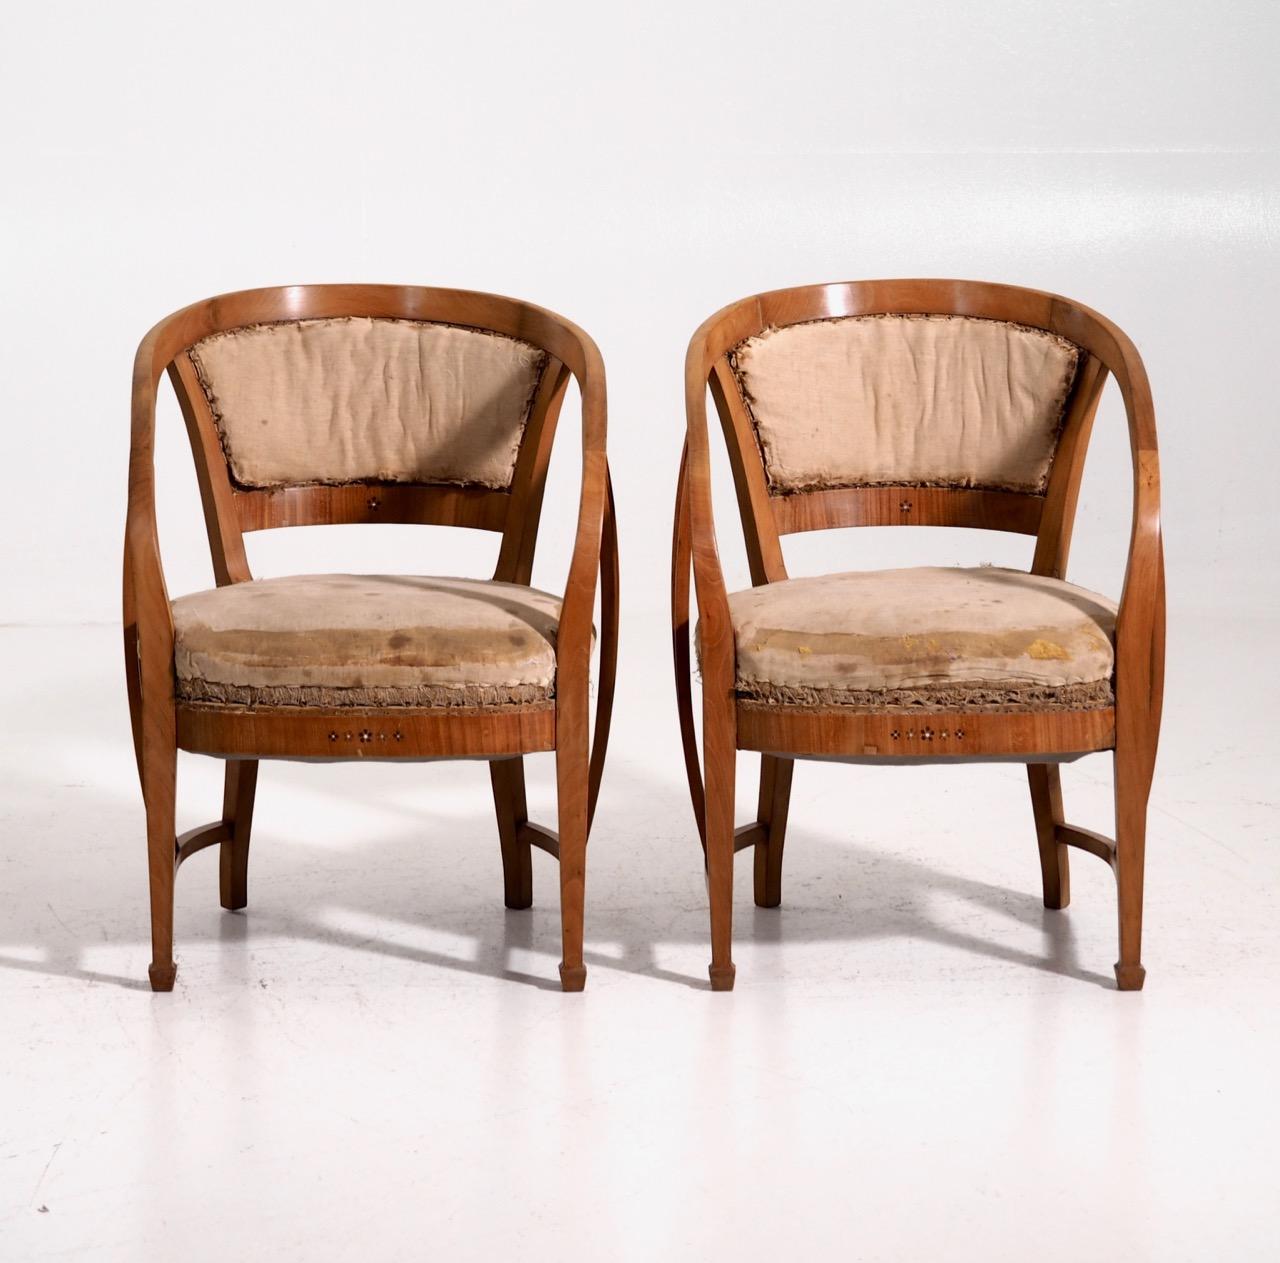 Pair of very rare Art Nouveau armchairs. Probably by one of the famous Austrian architects, made in cherrywood. Inlaid with mother of pearl and with various fruitwood, circa 1905.